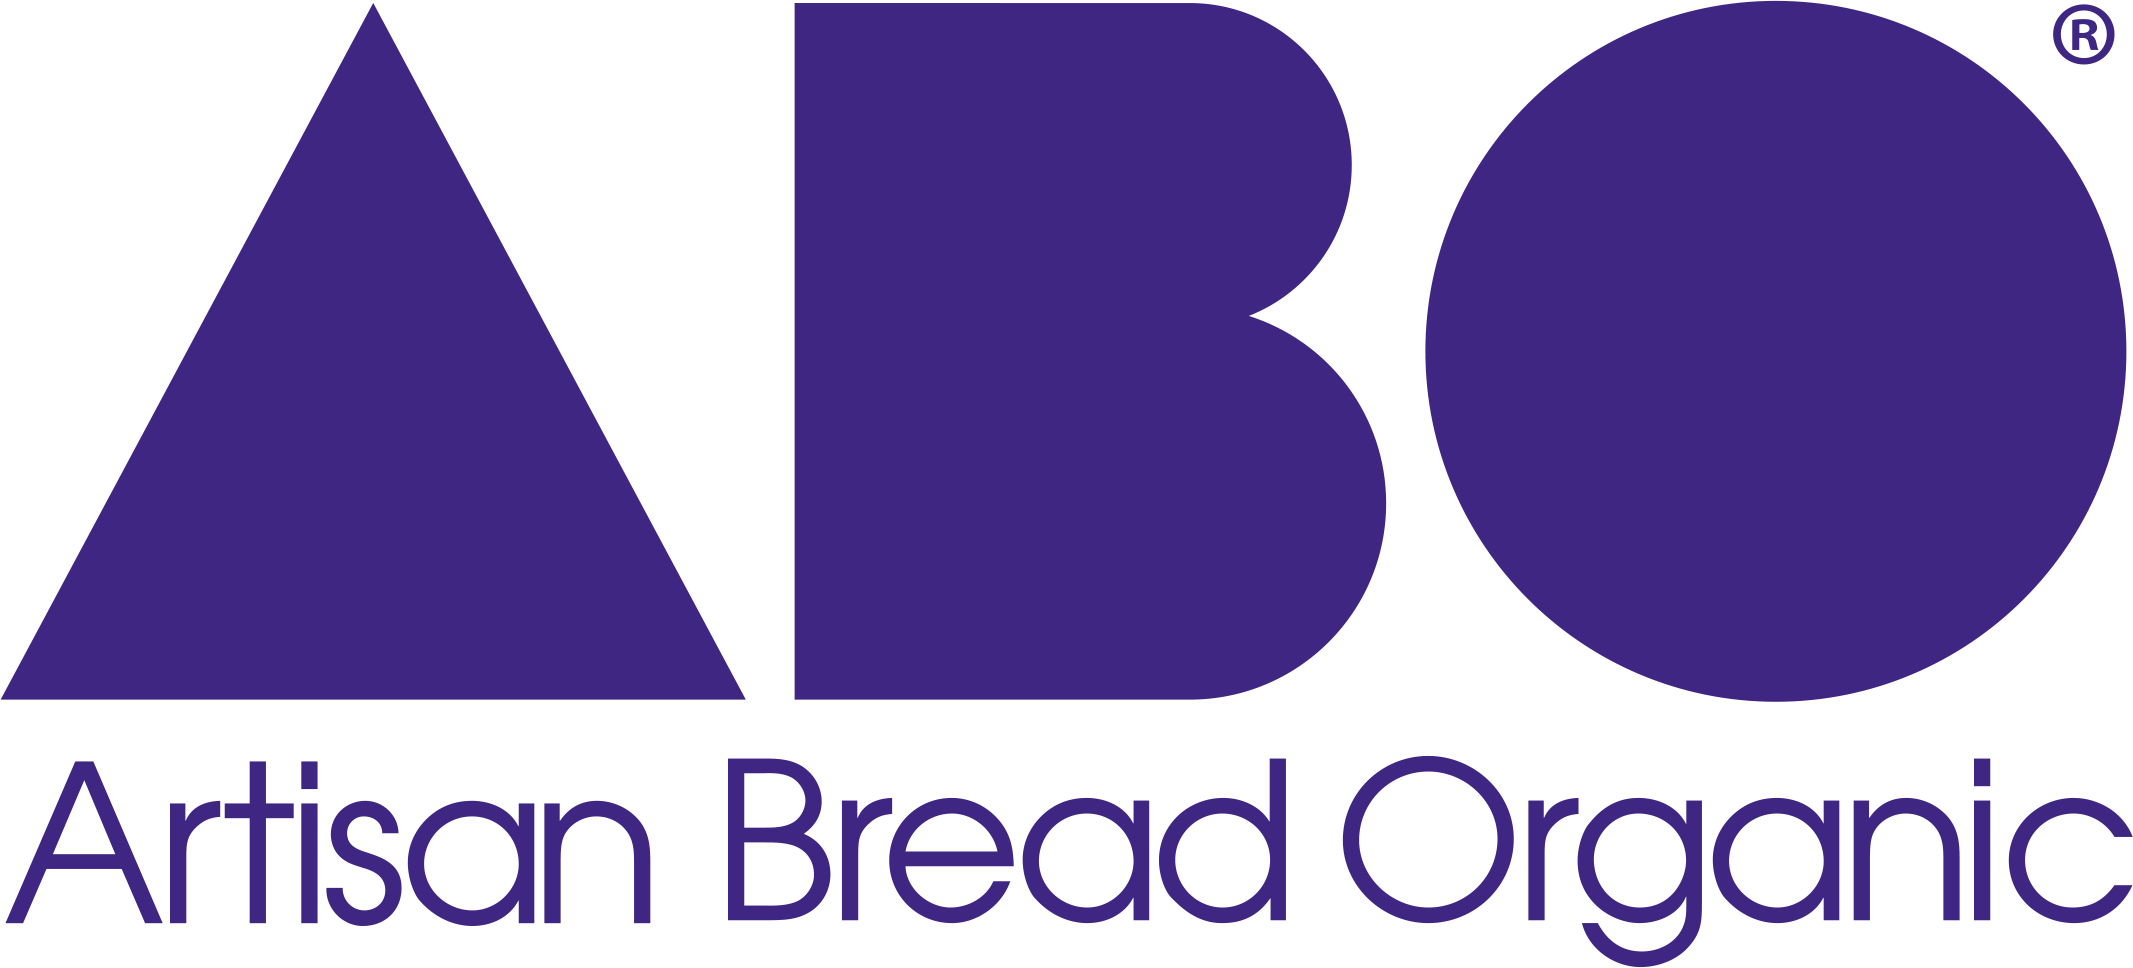 Bakery Business Manager For Artisan Bread Ltd - Graphic Design (2133x968)